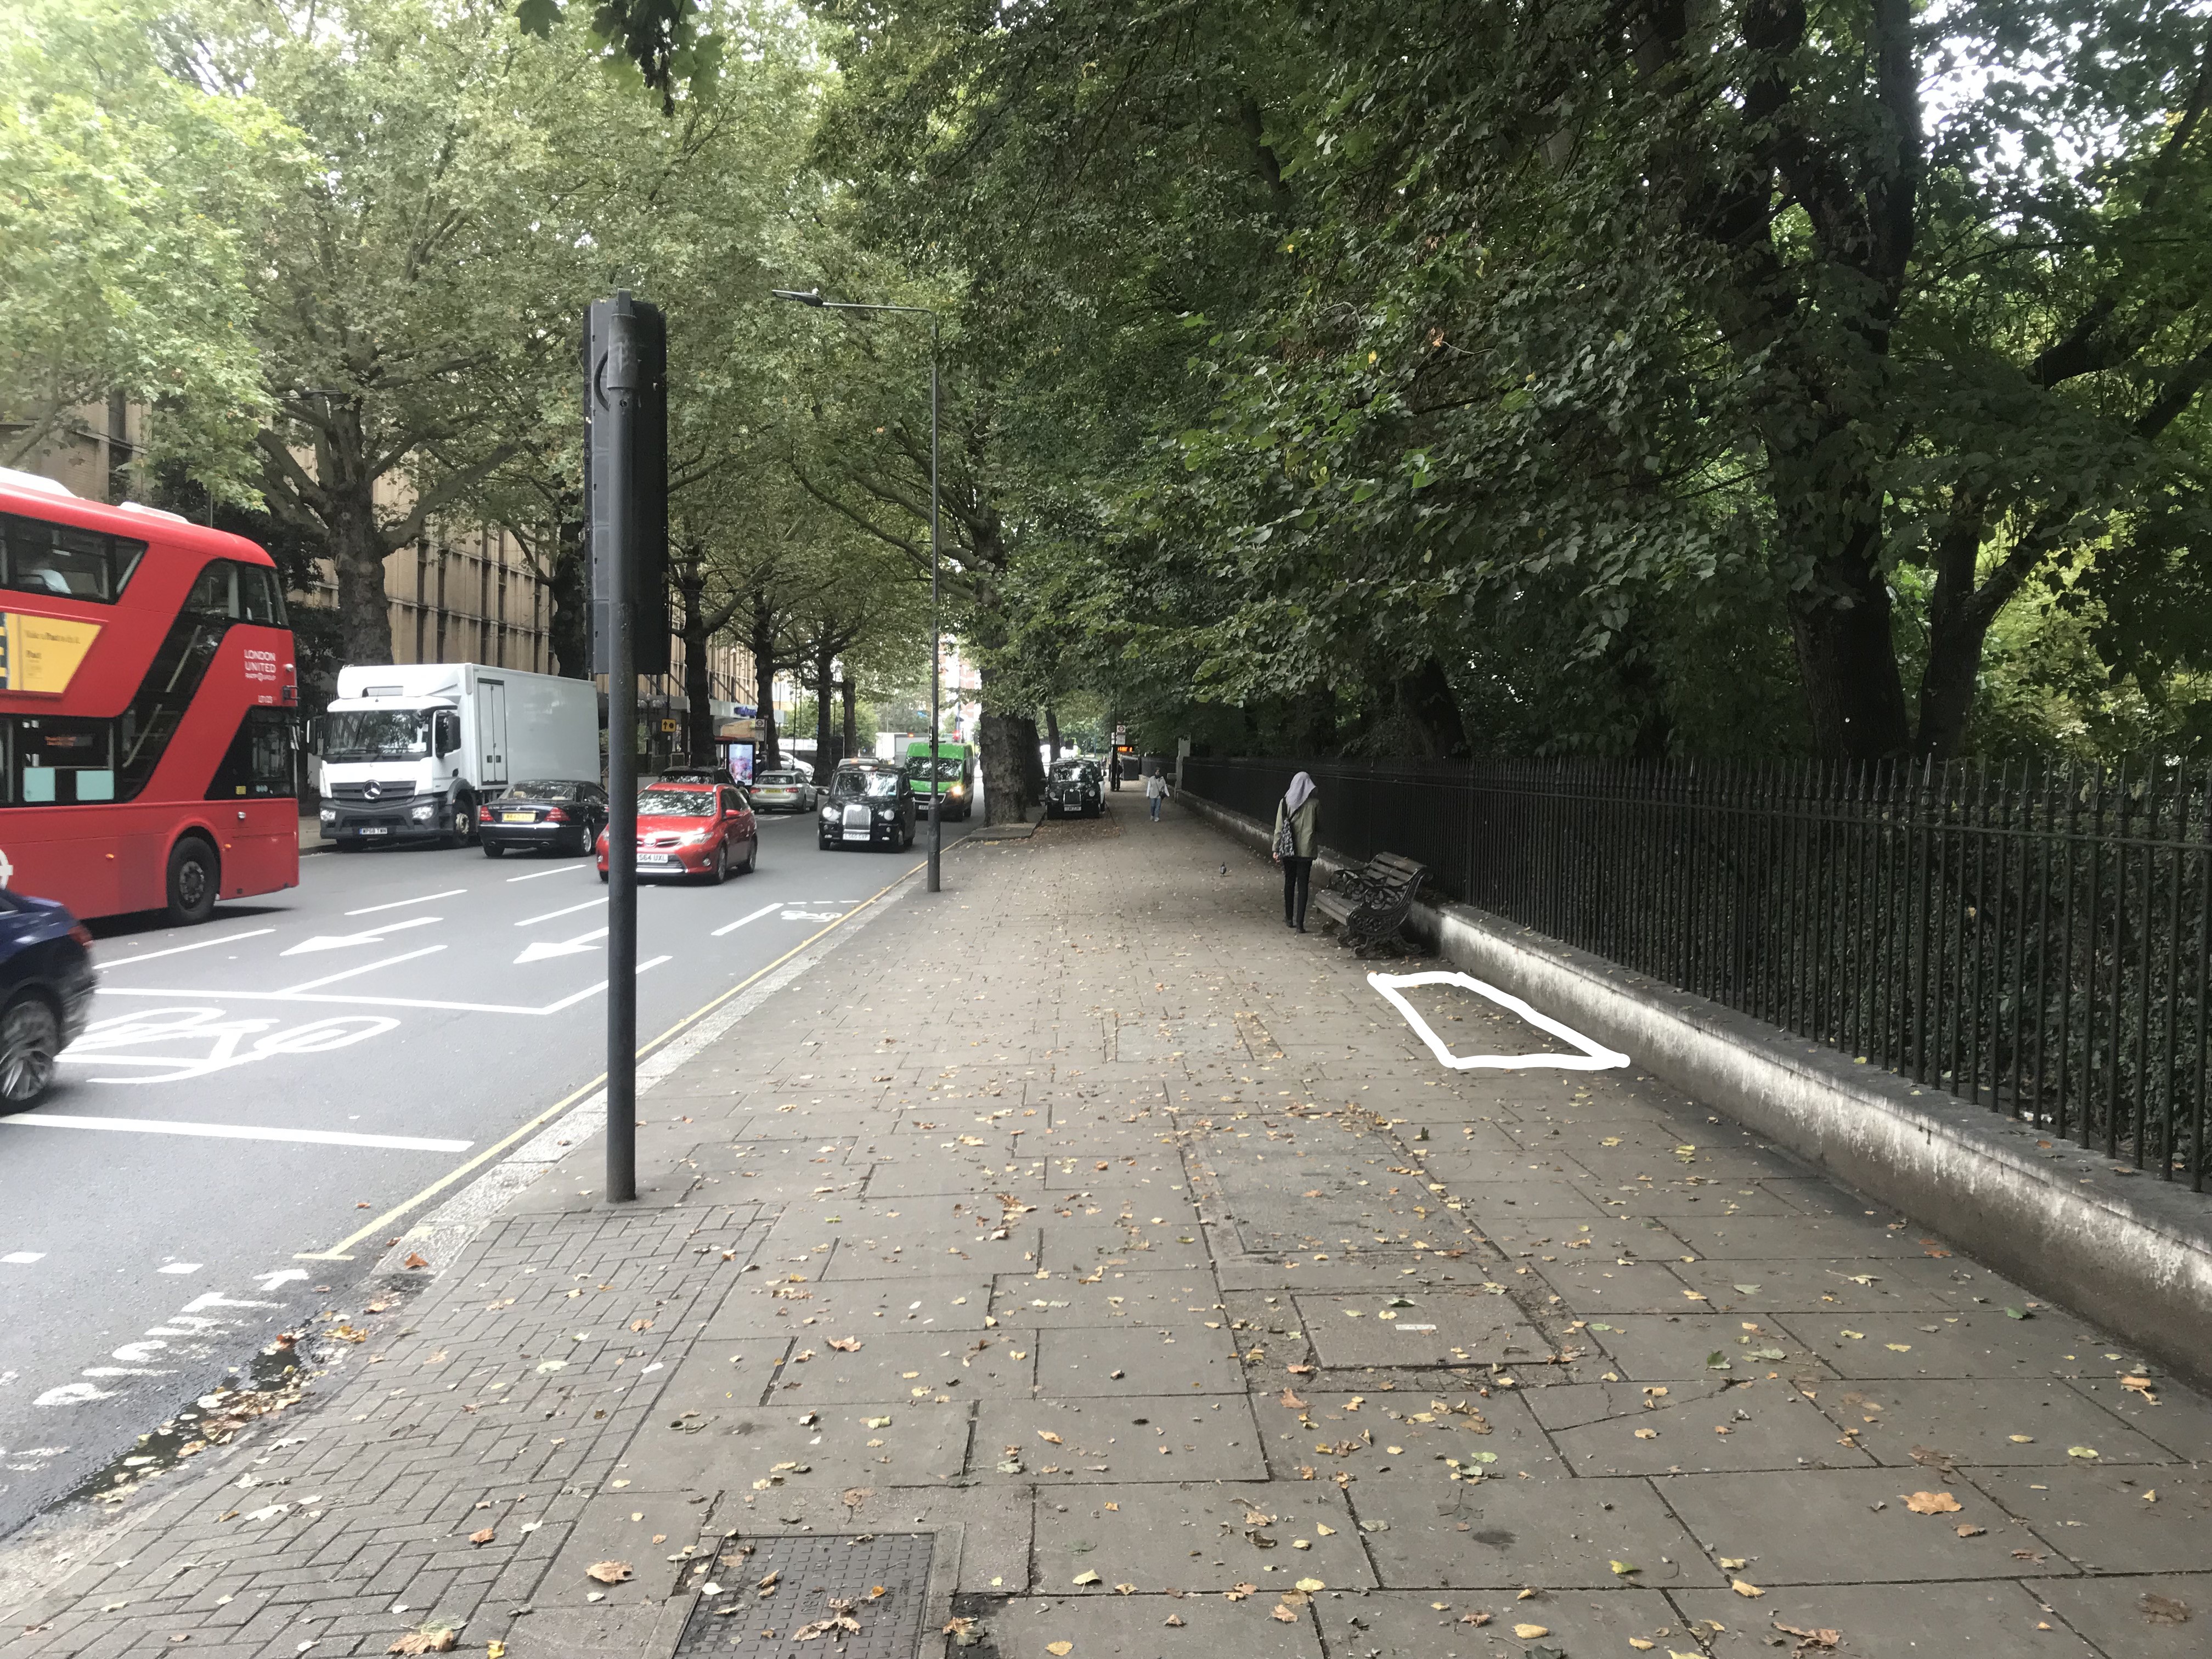 The proposed bay is at the rear of the footway on Holland Park Avenue, south of Royal Crescent Gardens